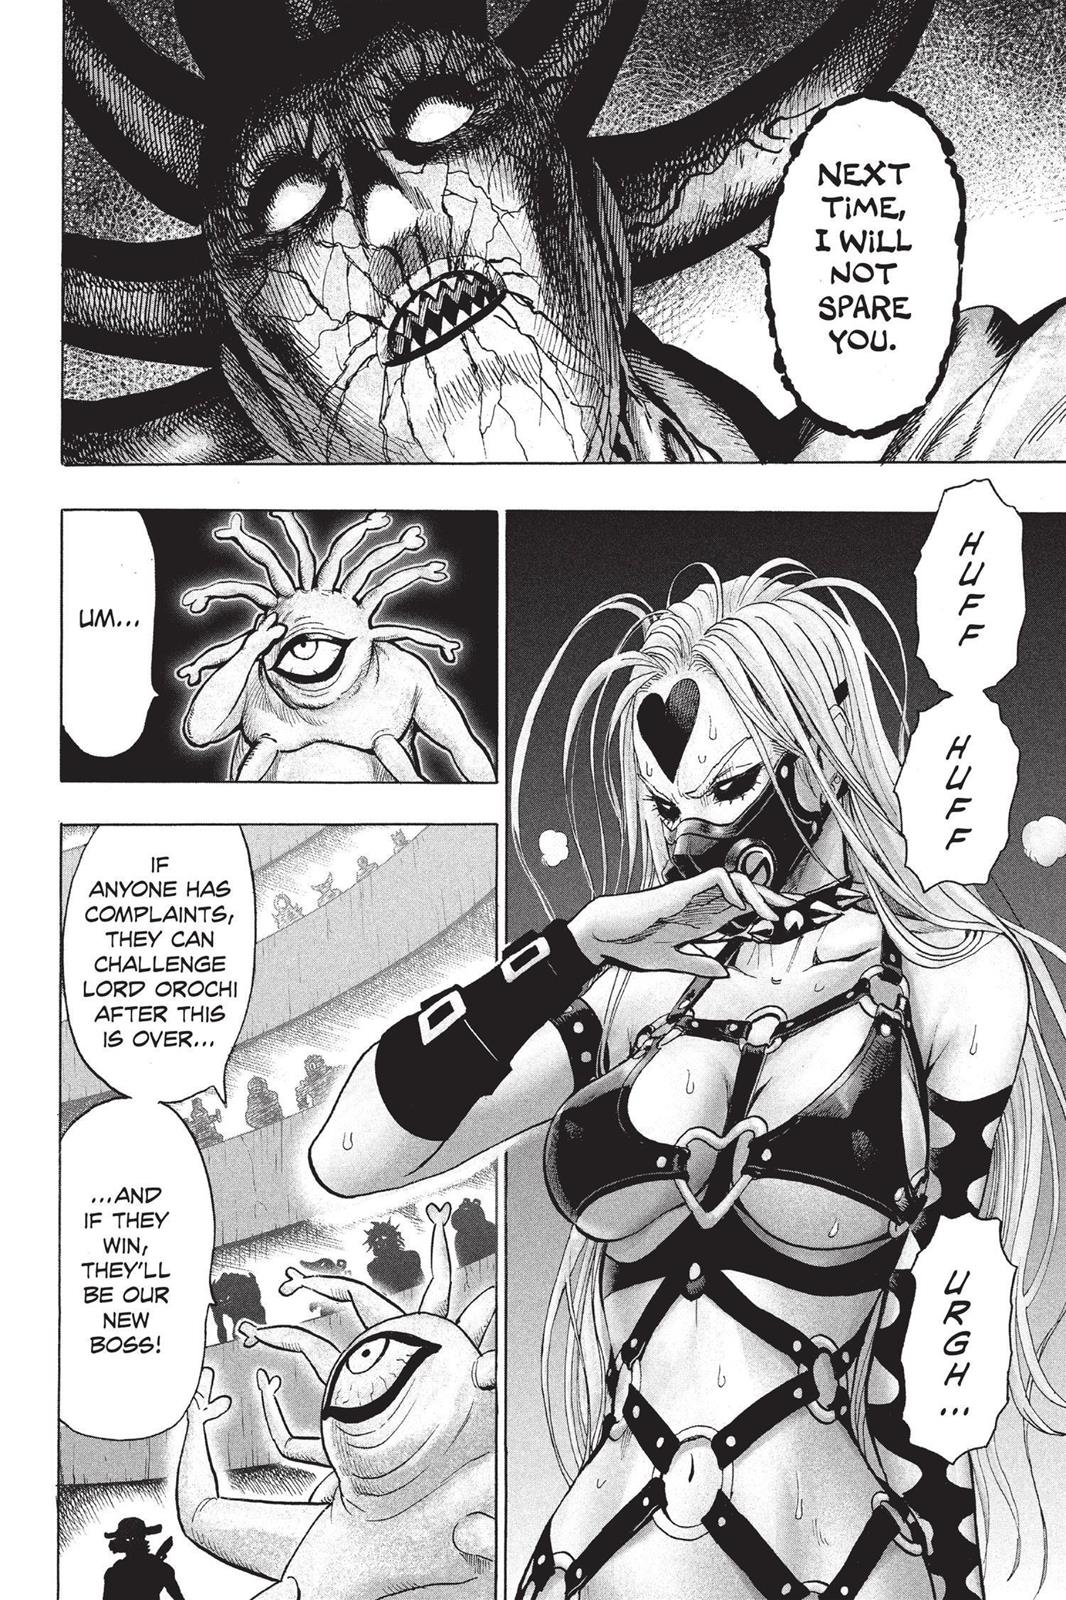 One-Punch Man, Punch 79 image 36